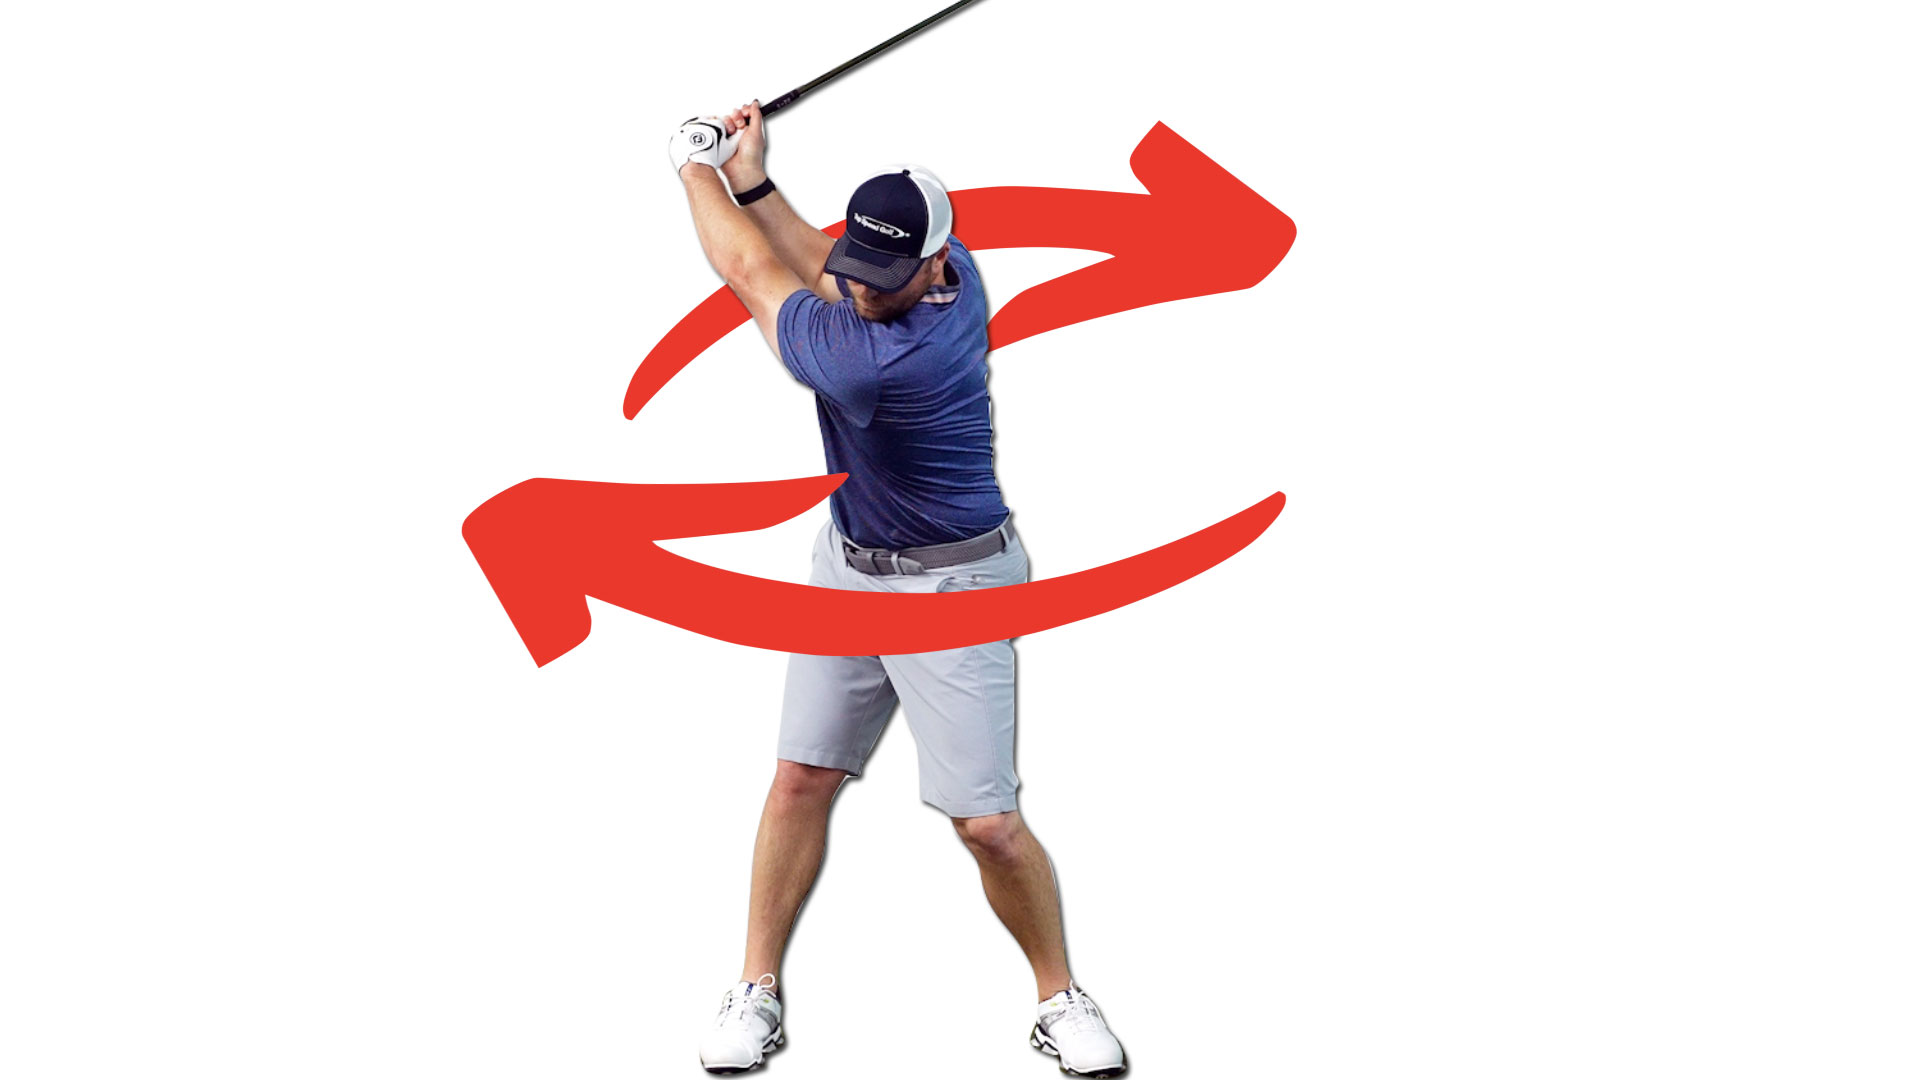 The Best Golf Rotation Drill - The “90-90 Stretch” • Top Speed Golf